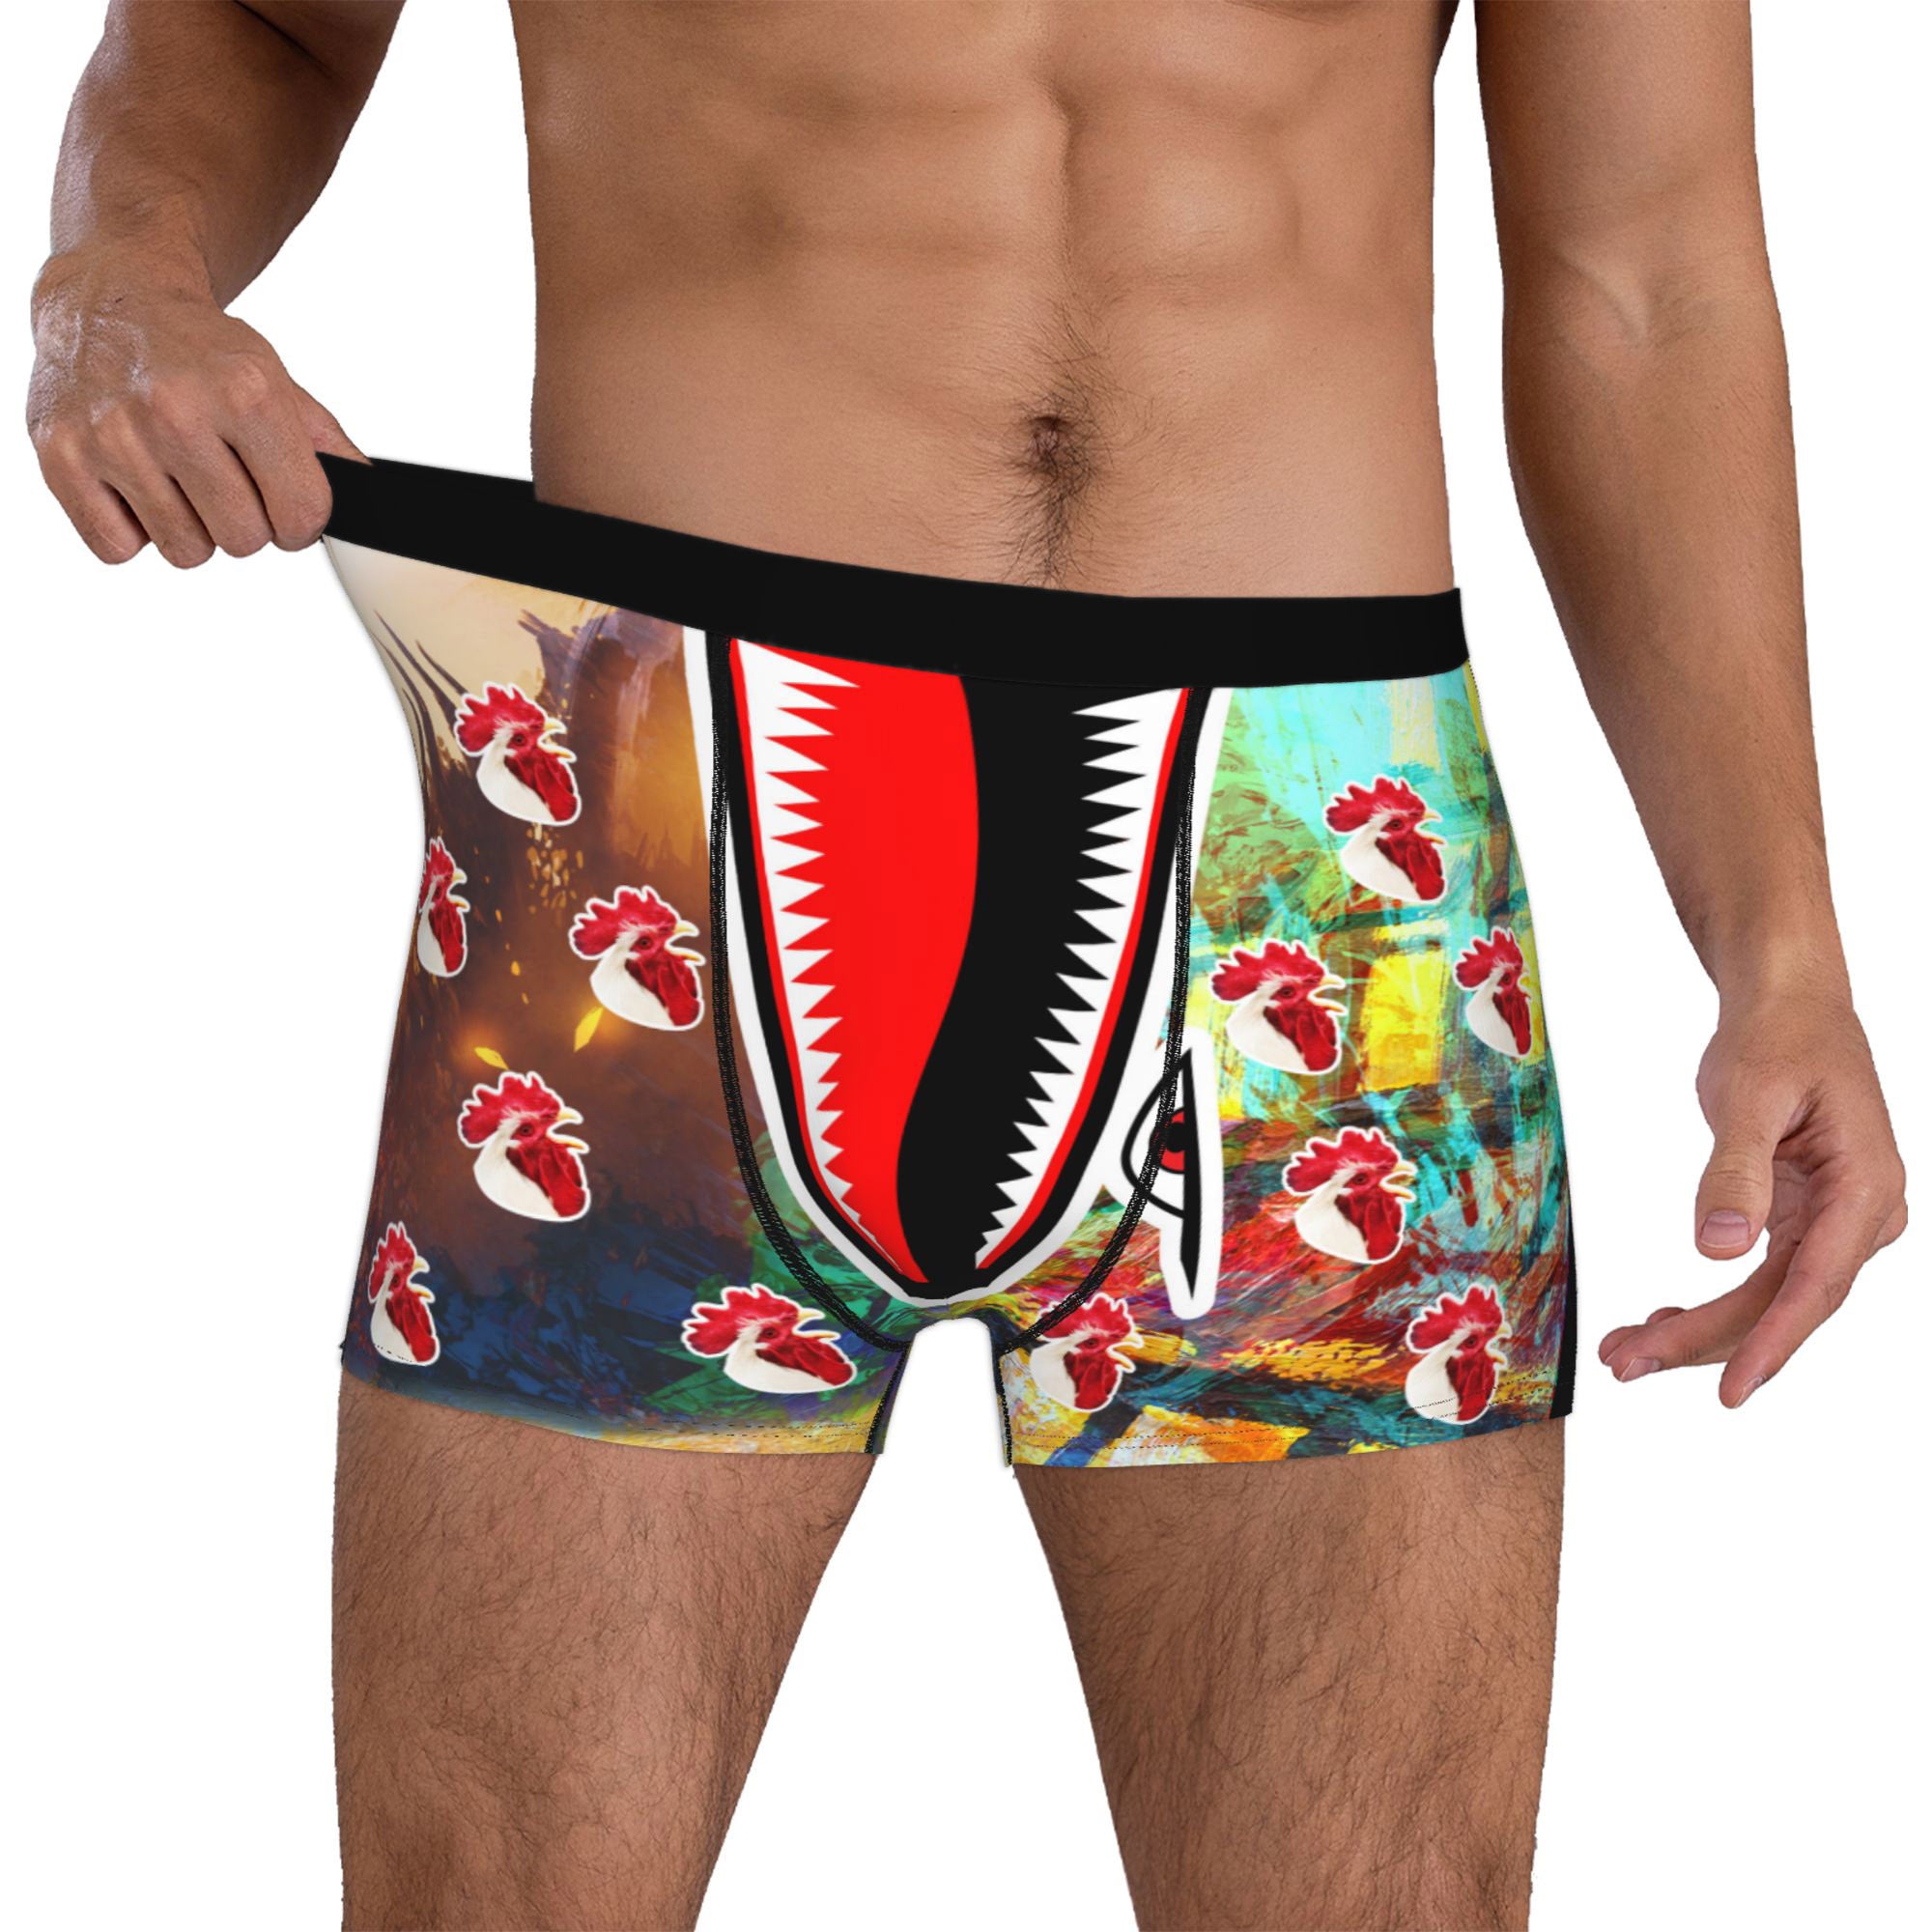 Customized Boxers for Men with Faces Custom Underwear for Men